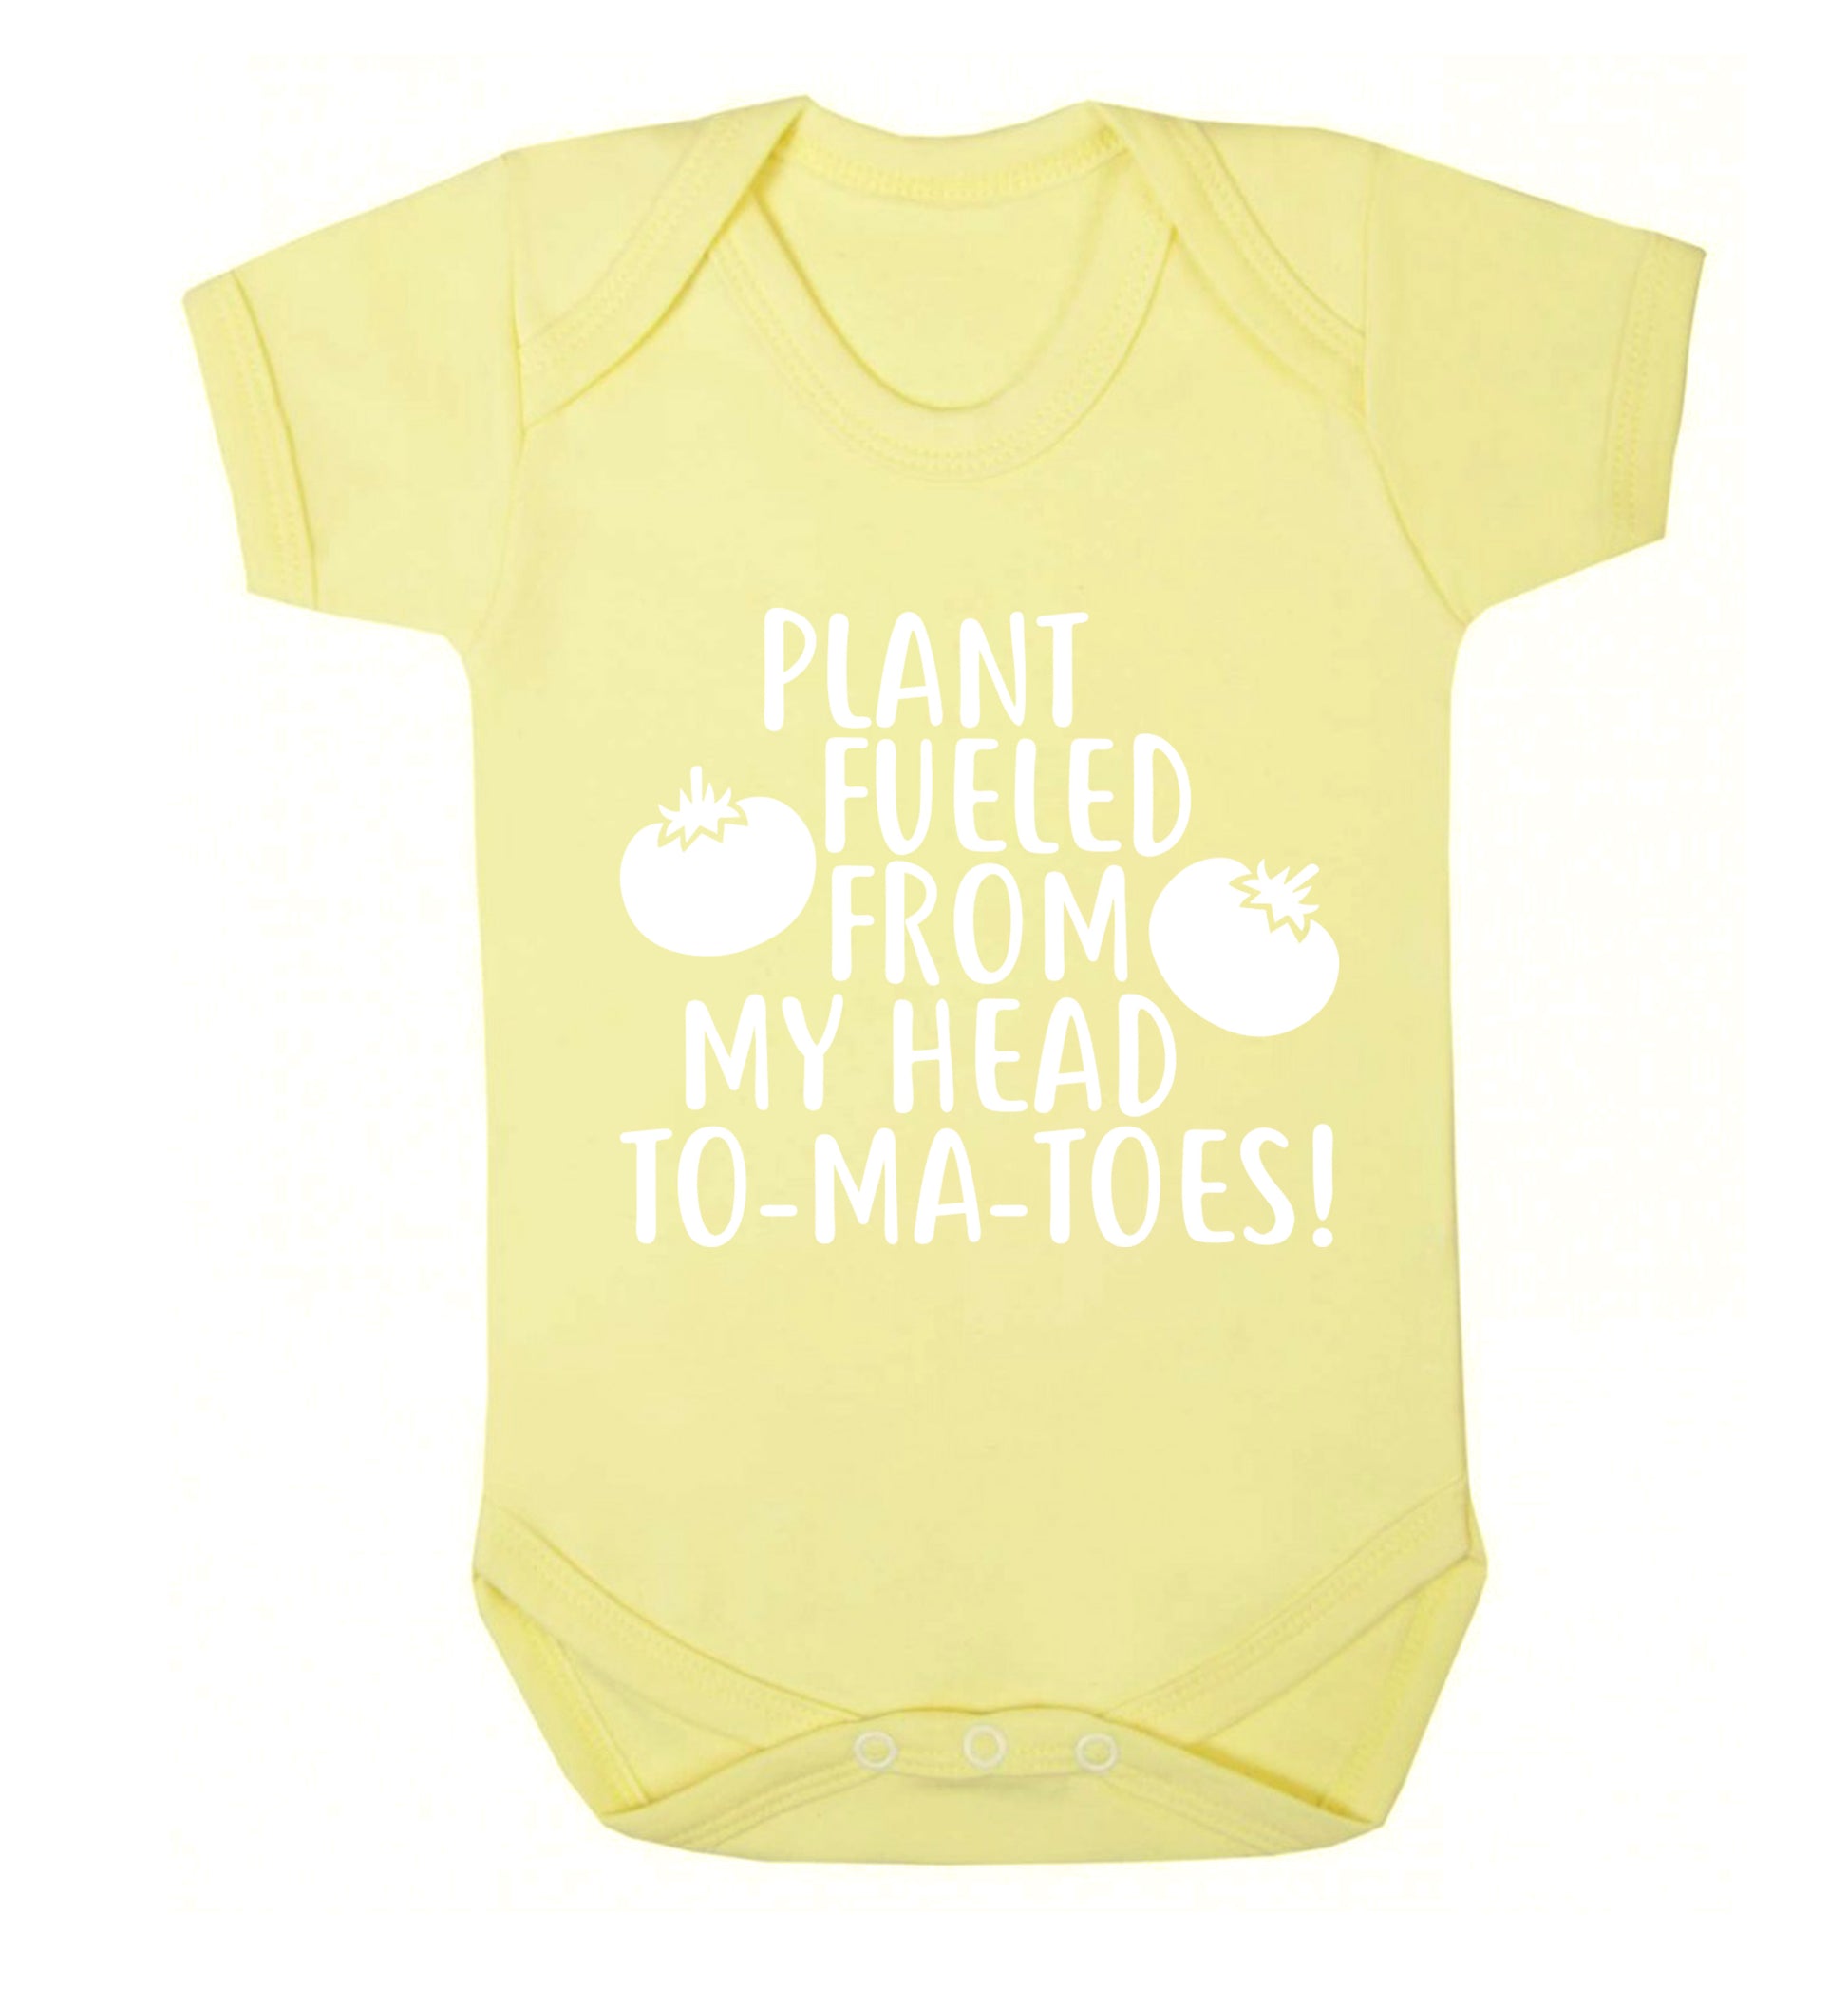 Plant fueled from my head to-ma-toes Baby Vest pale yellow 18-24 months